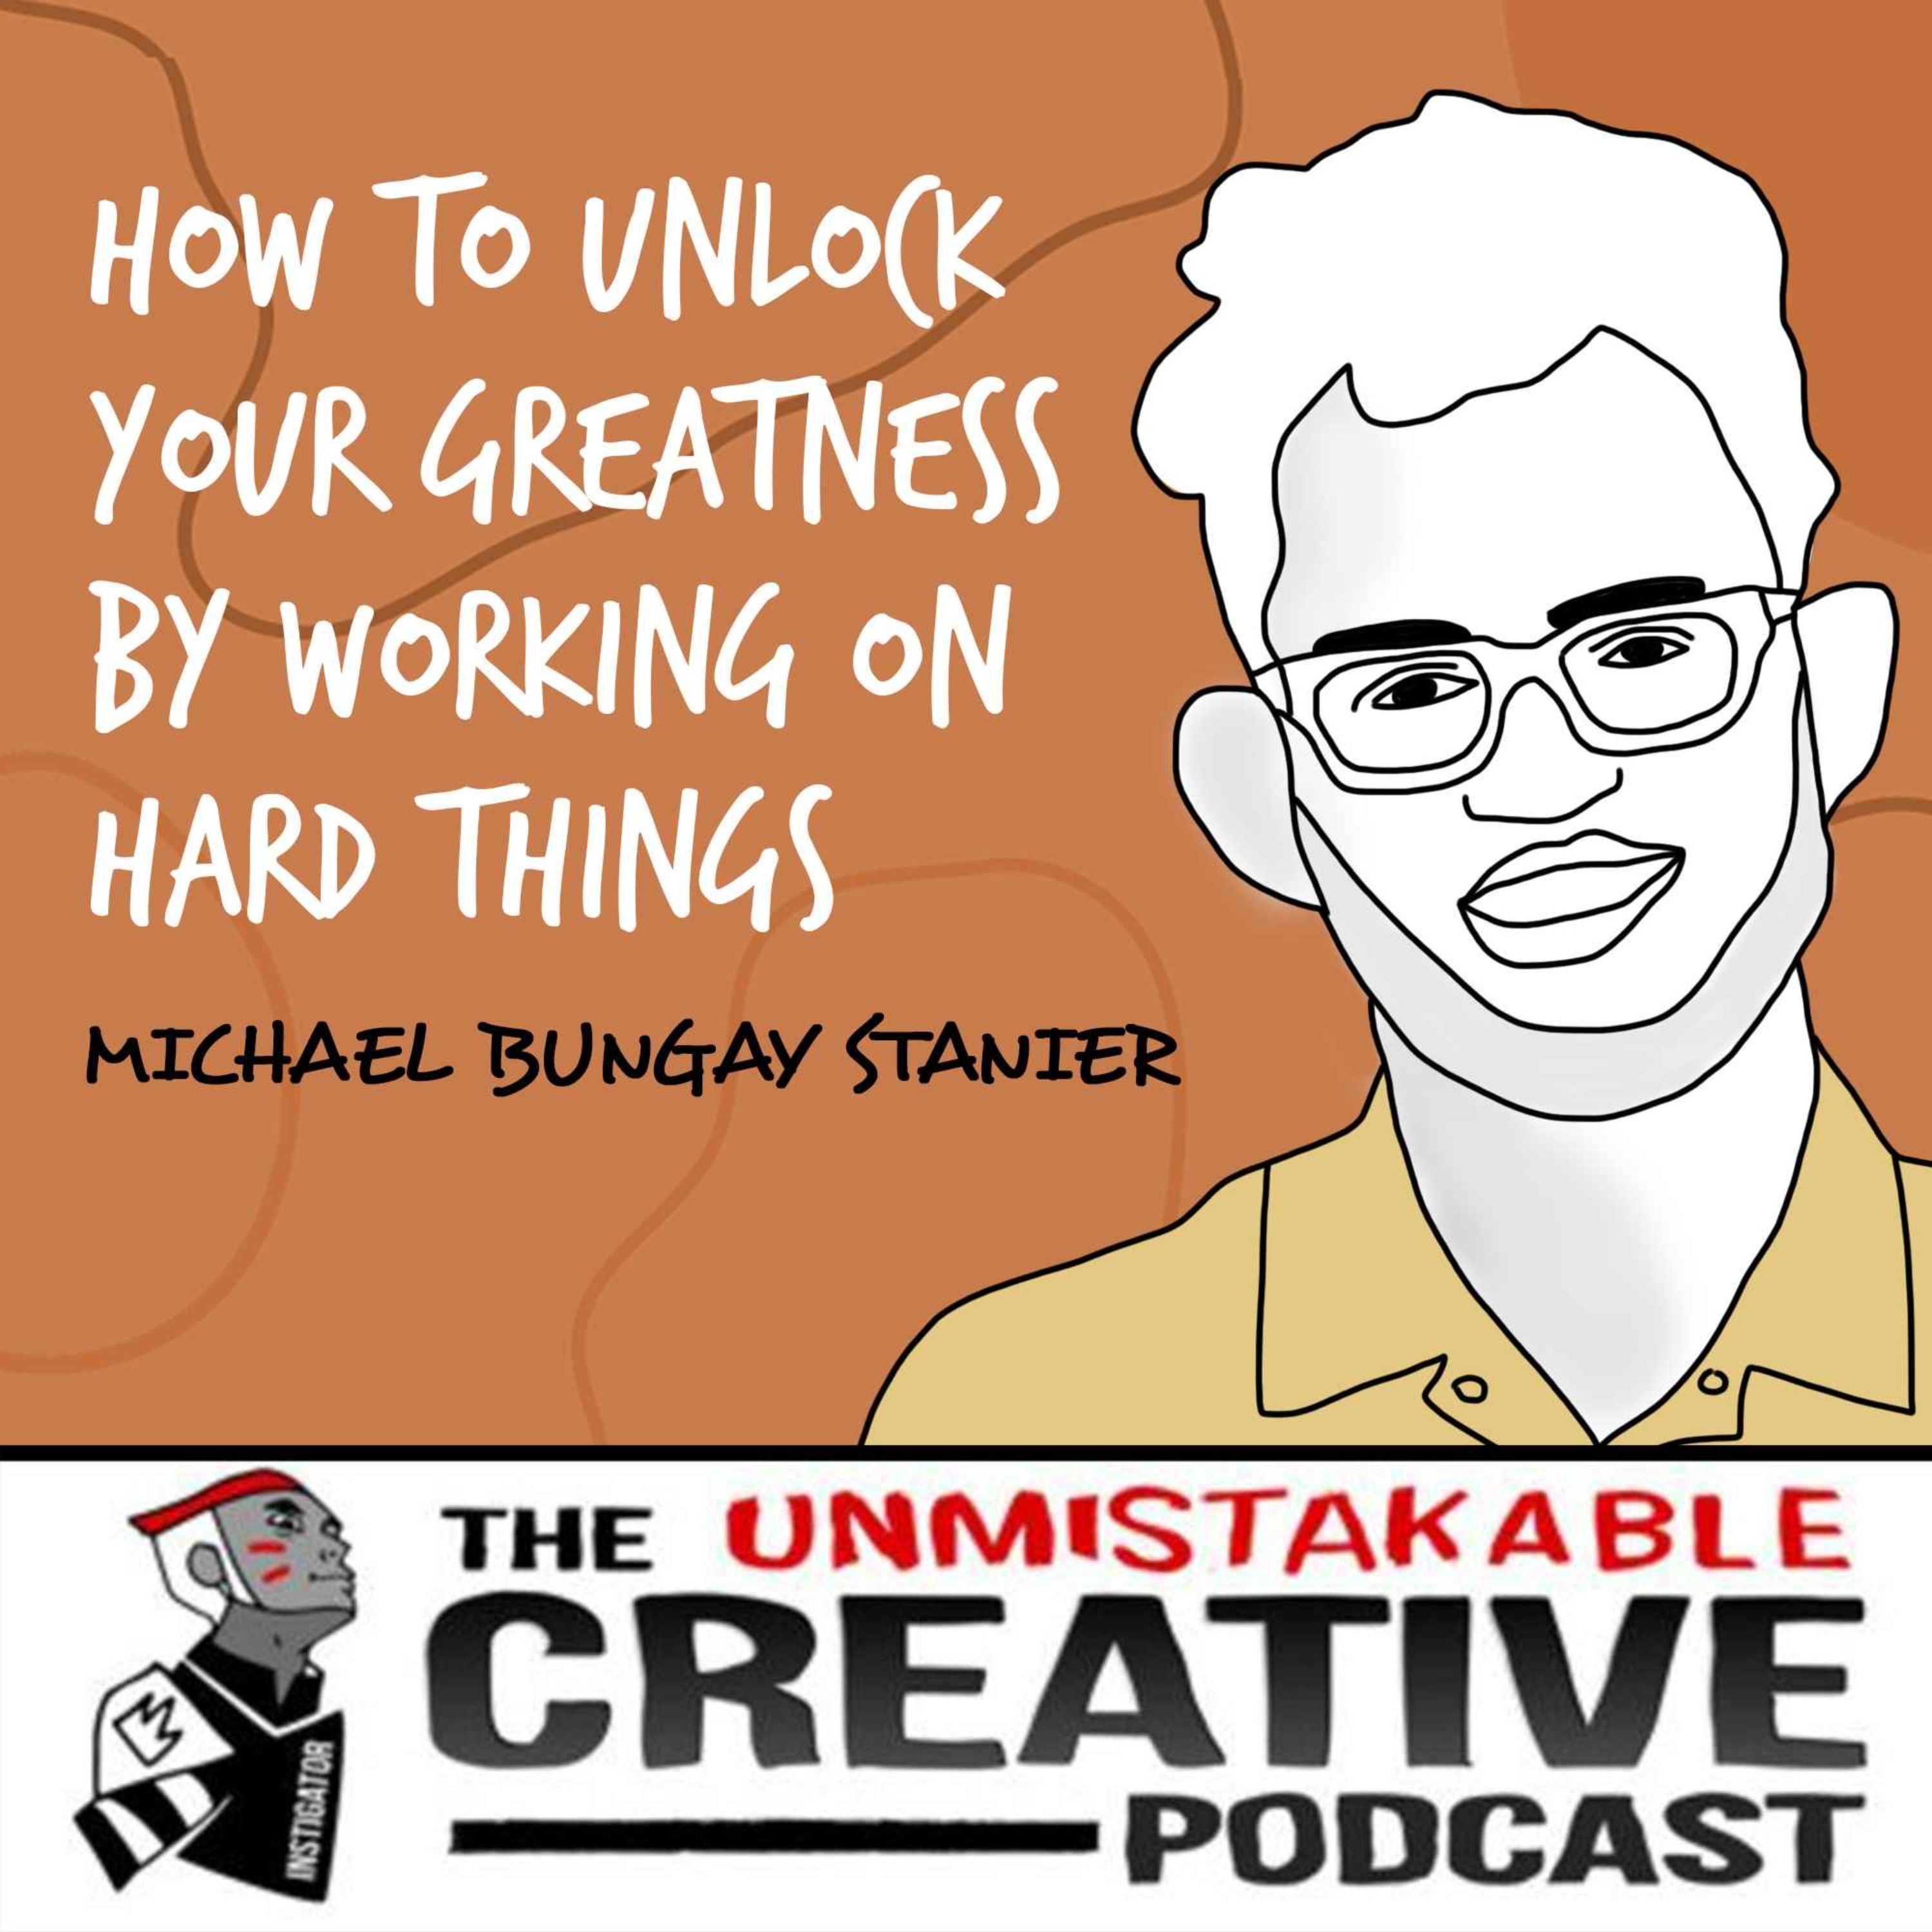 Michael Bungay Stanier | How to Unlock Your Greatness By Working on Hard Things Image